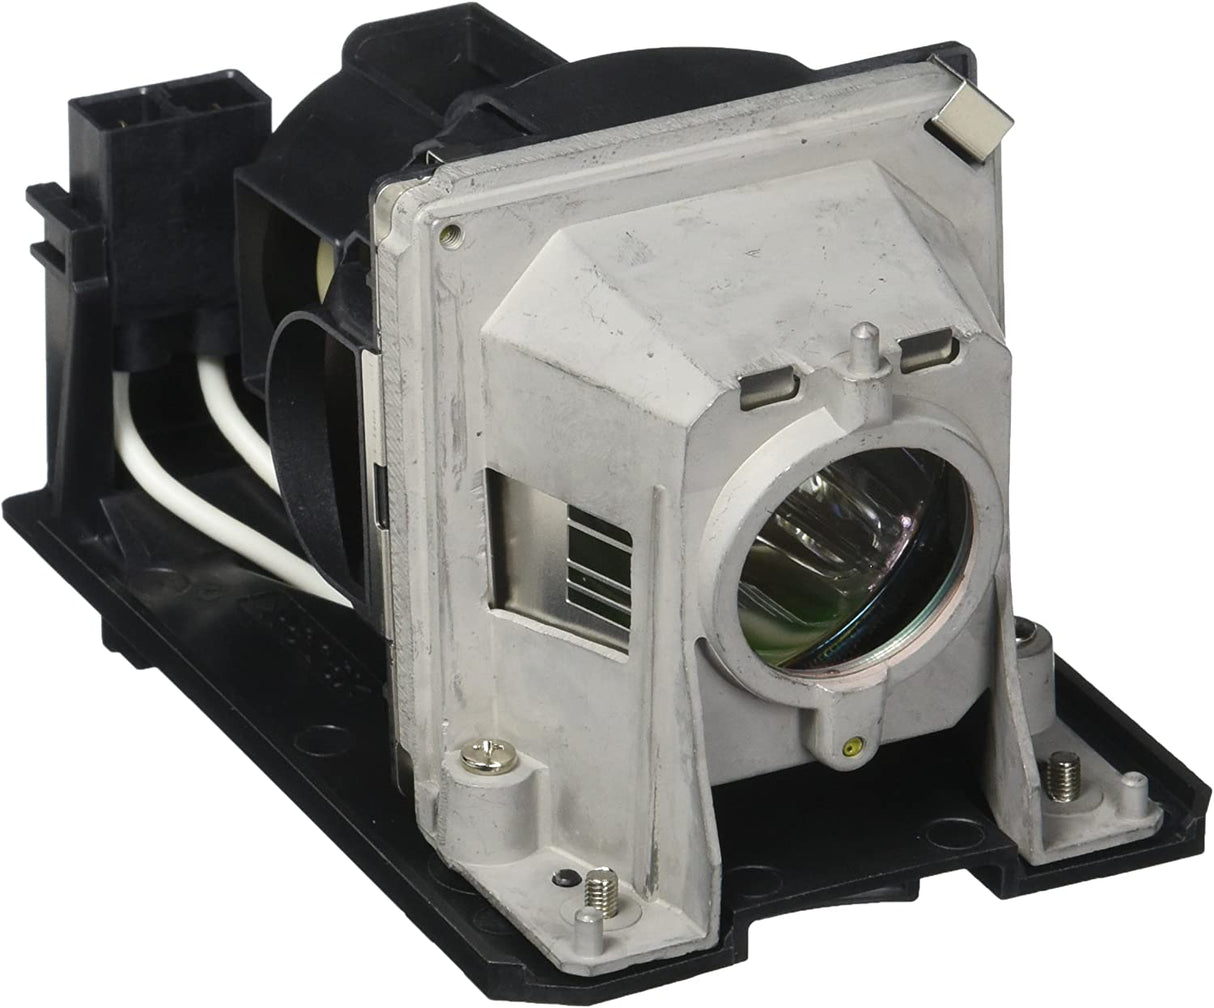 Nec Replacement Lamp for Np-V300x &amp; Np-V300w Projectors